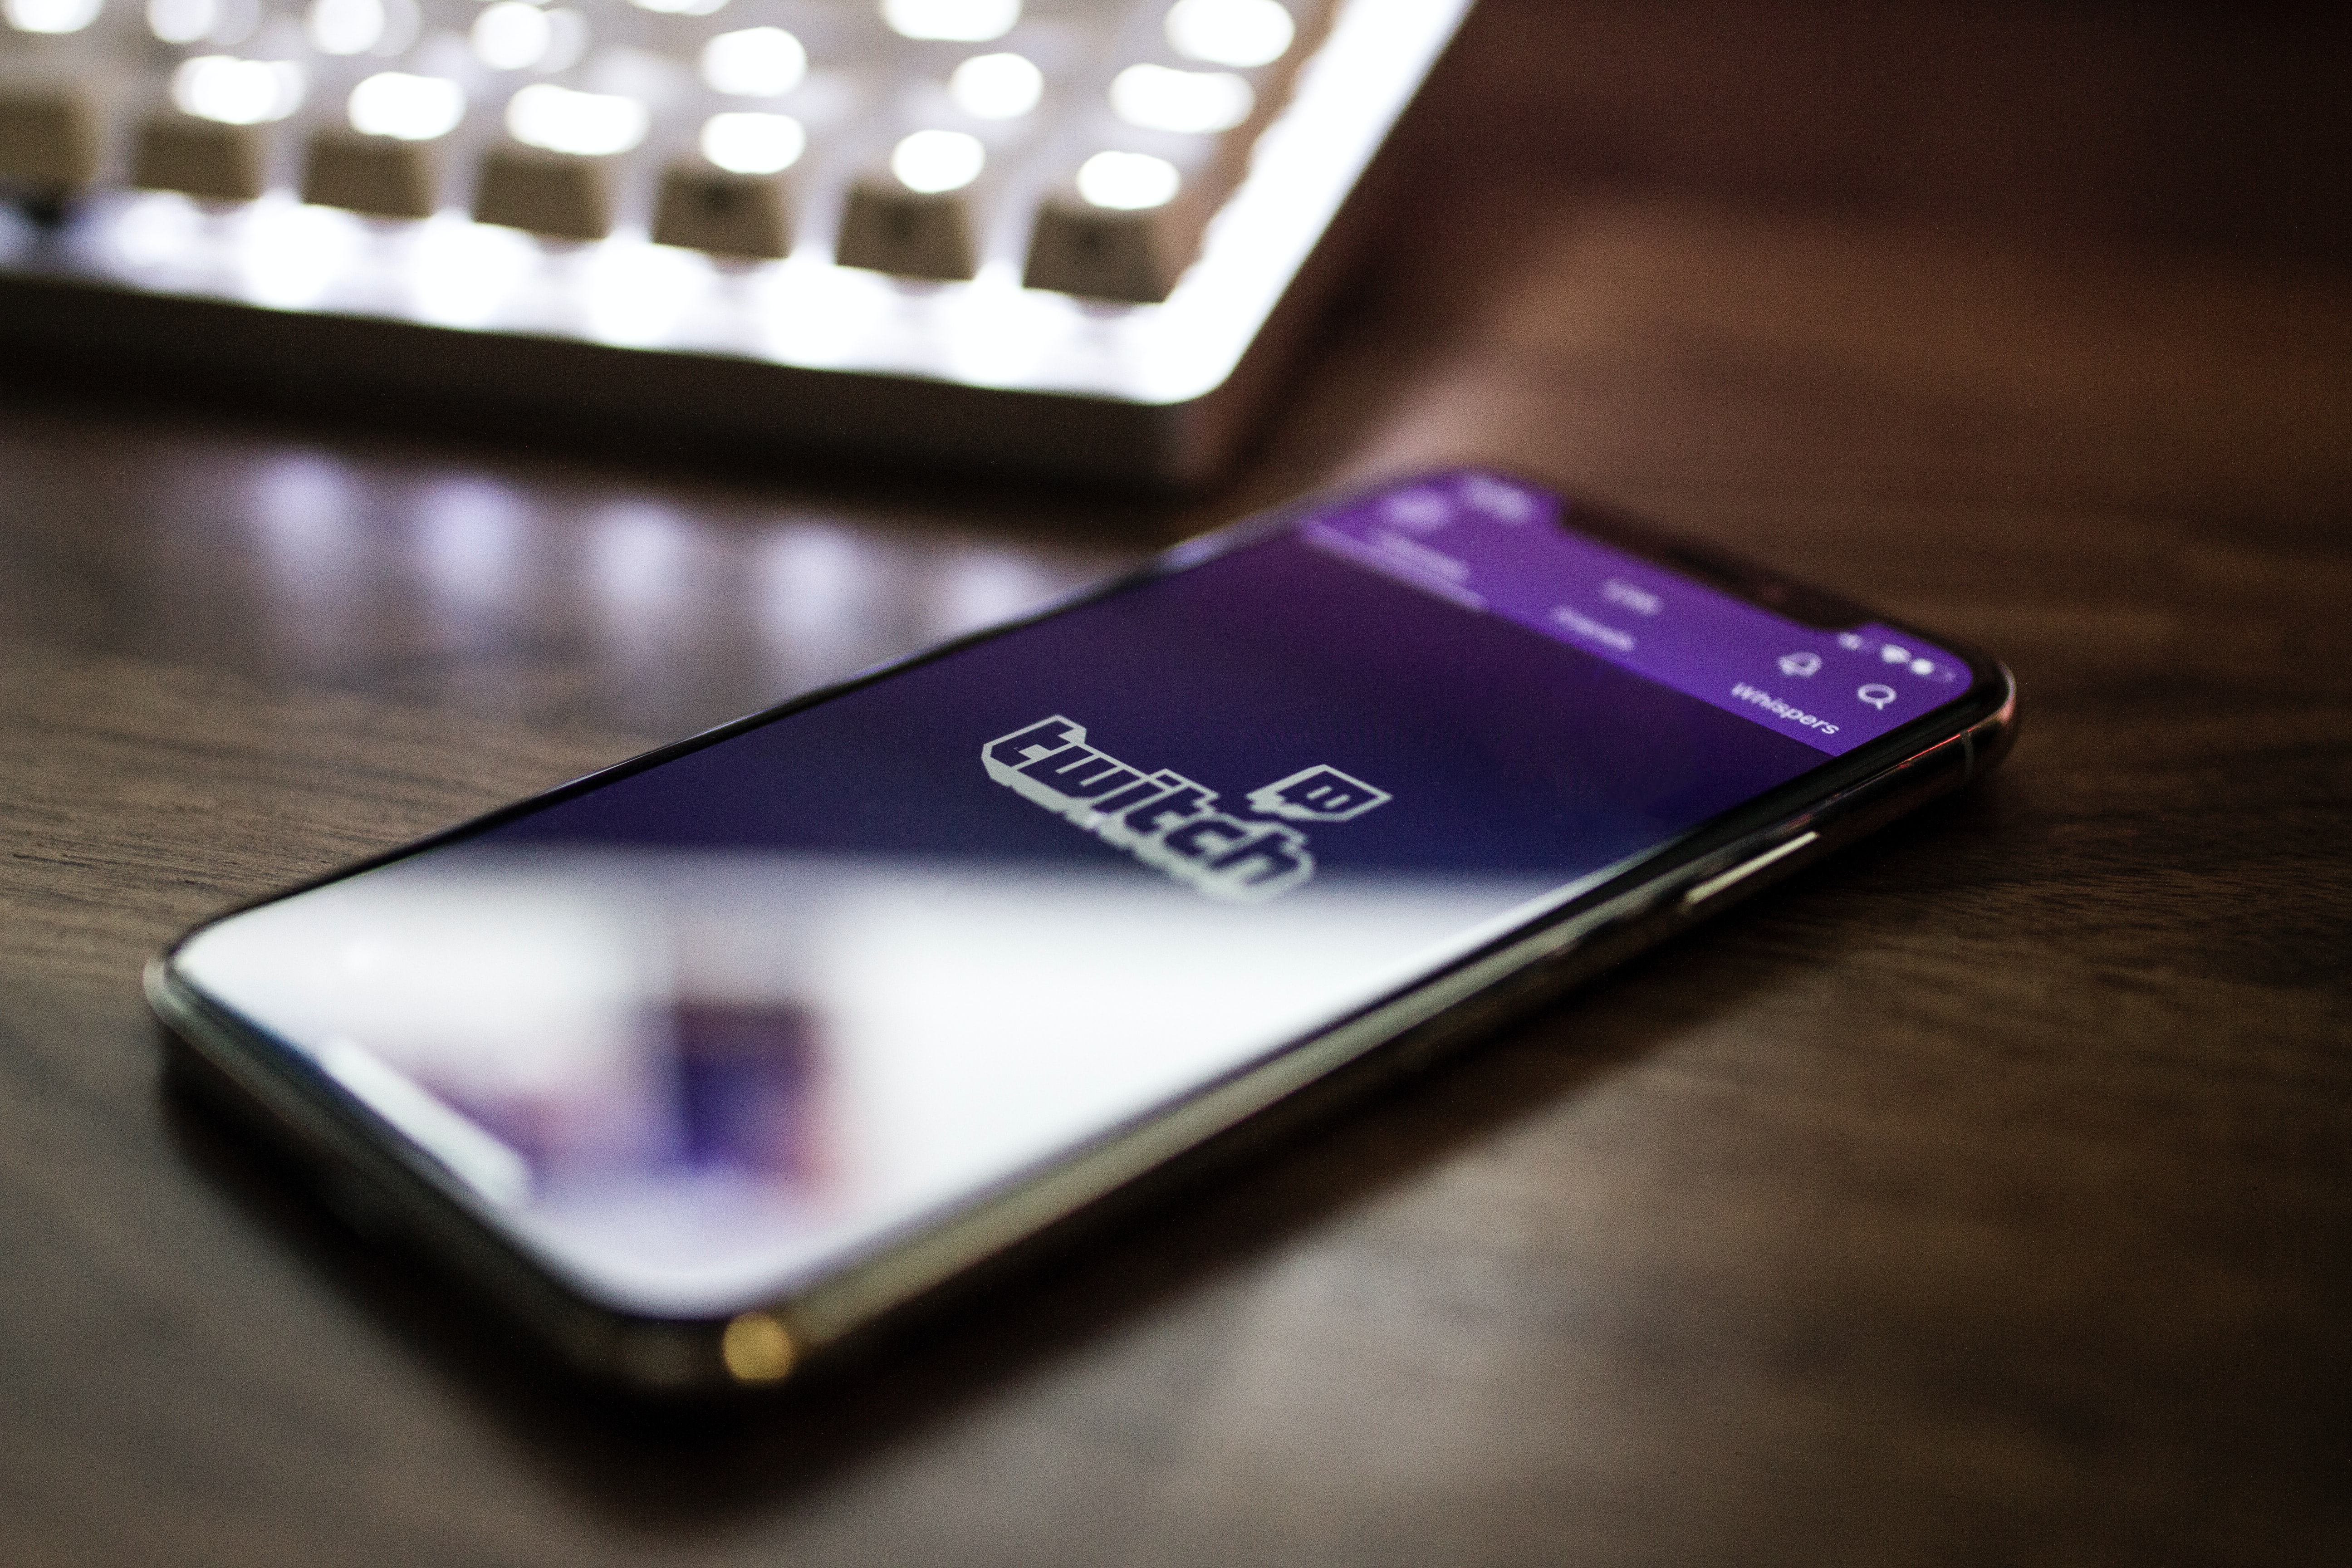 Why considering Twitch in your digital strategy?